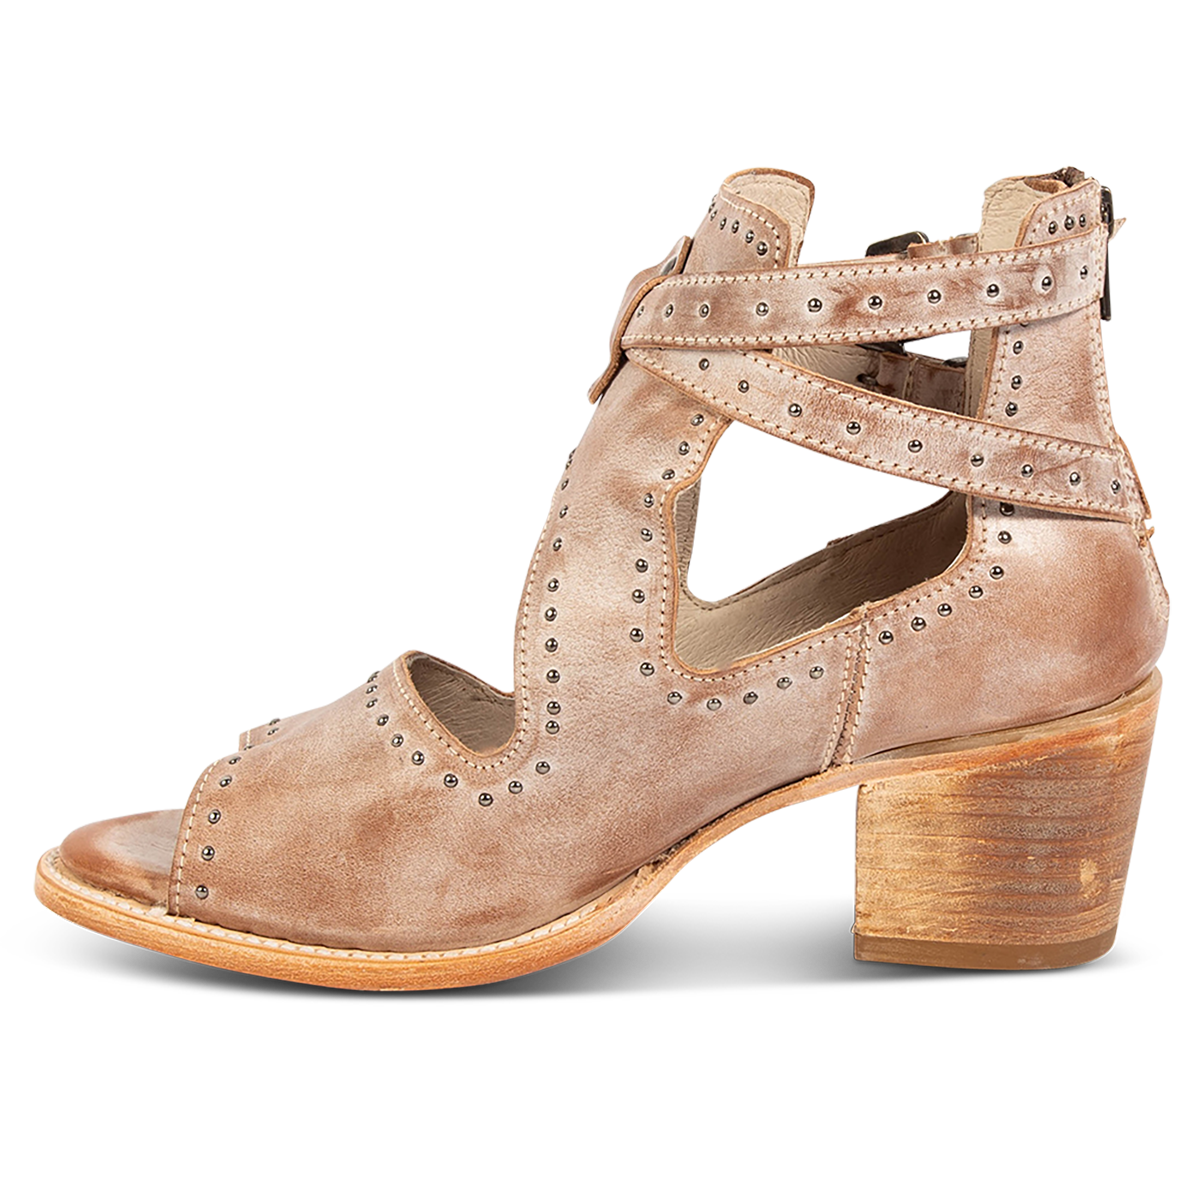 Inside view showing a block heel, dual adjustable straps and stud embellishments on FREEBIRD women's Cosmic taupe leather sandal